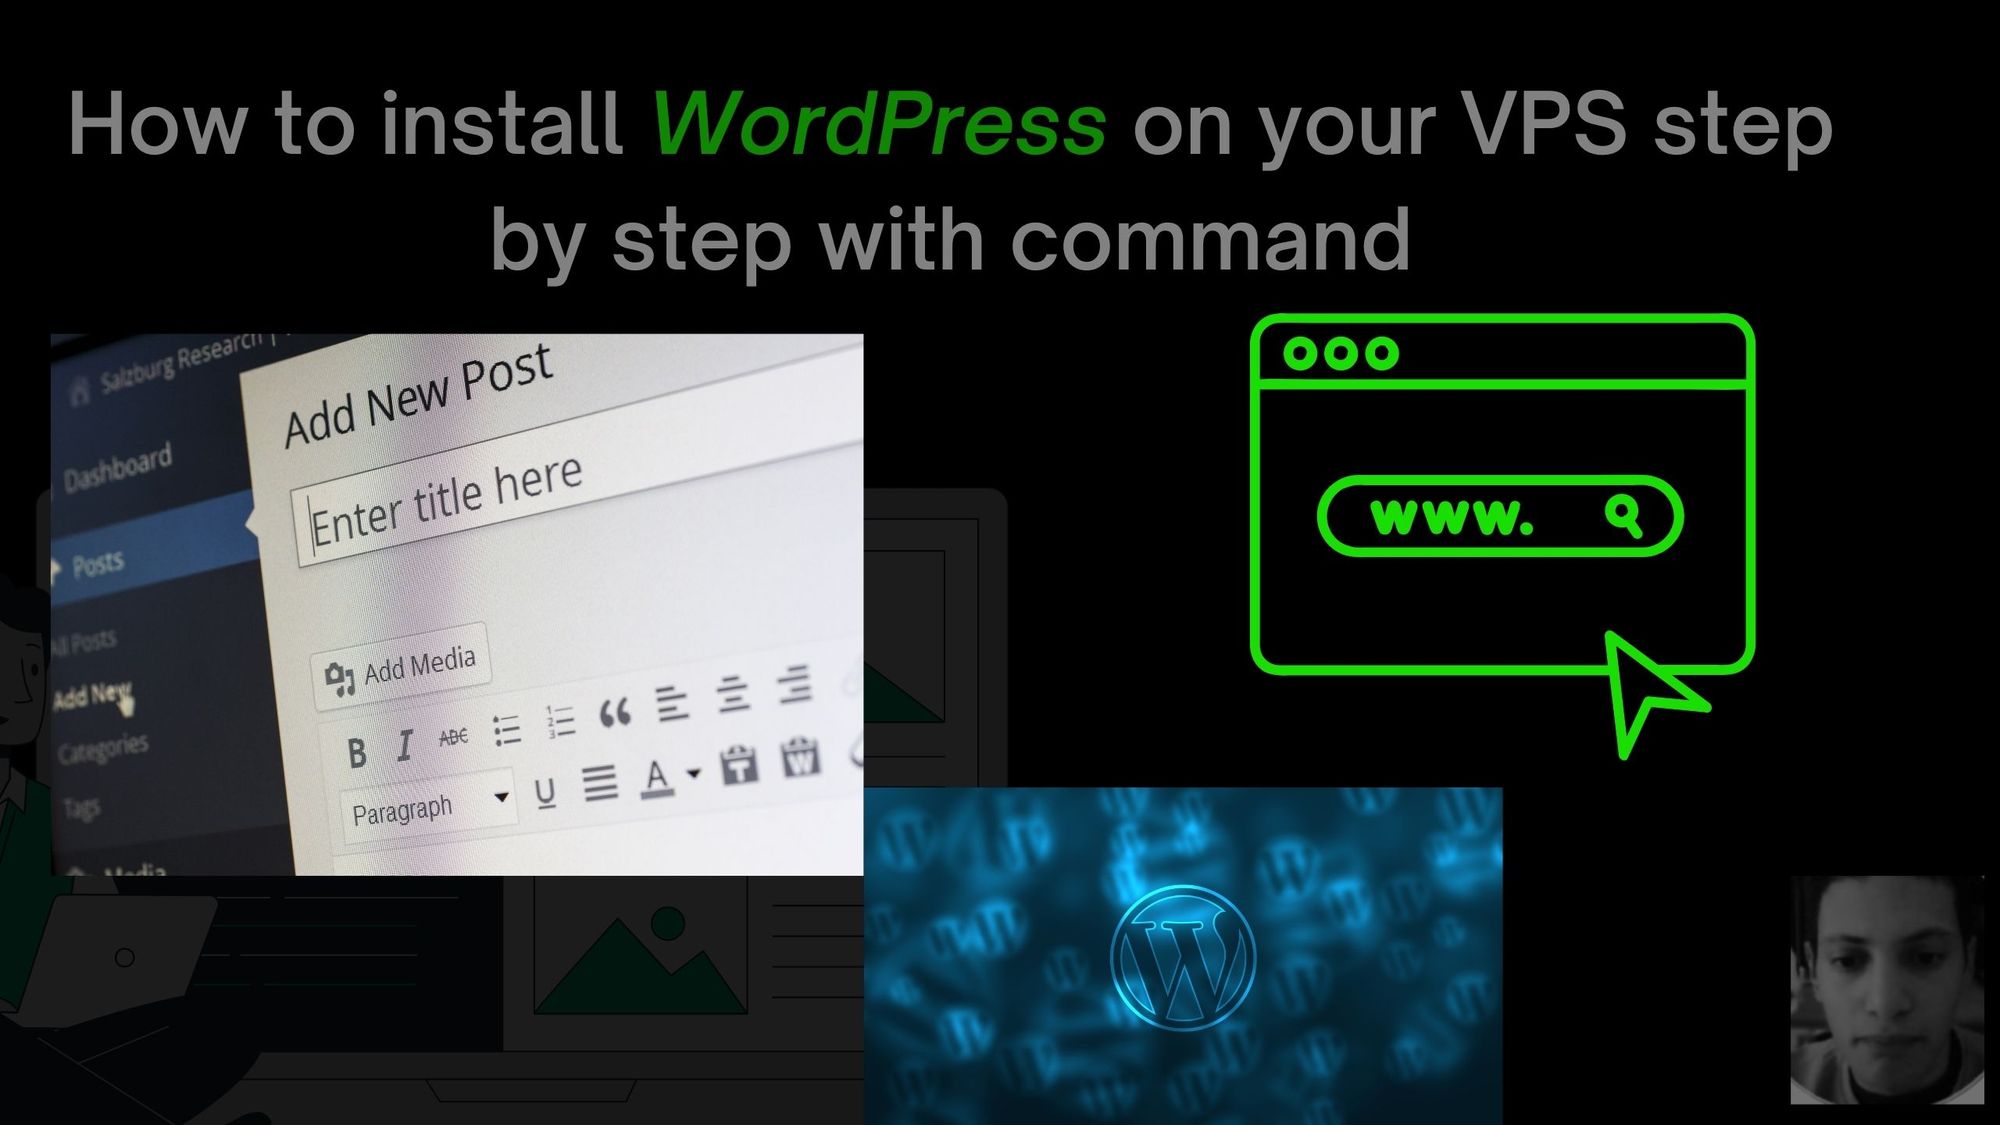 How to install WordPress on your VPS step by step with command, fastest and most popular methods to deploy your WordPress app